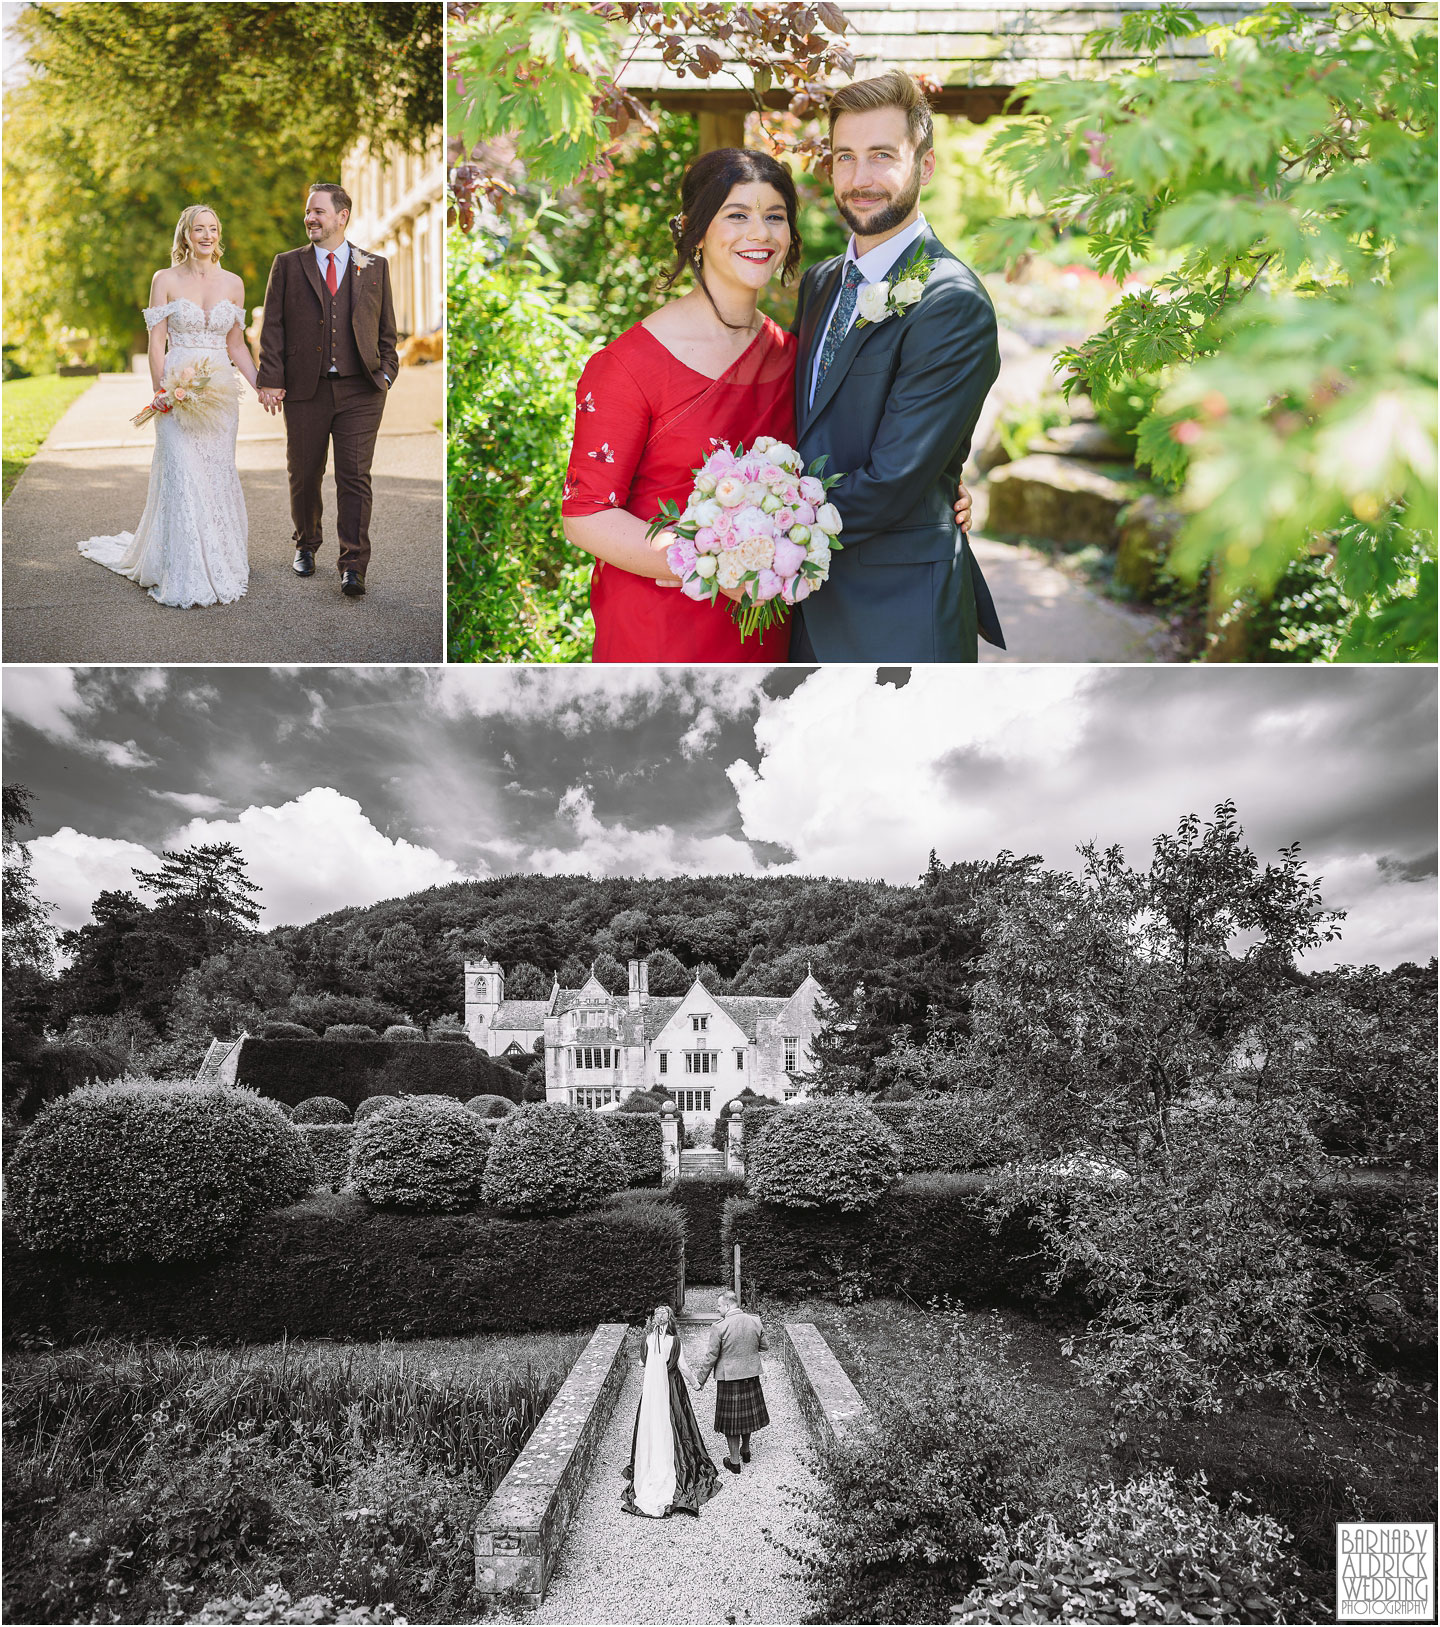 Relaxed wedding photos in Harrogate's Valley Gardens at The Sun Pavilion by Yorkshire Wedding Photographer Barnaby Aldrick